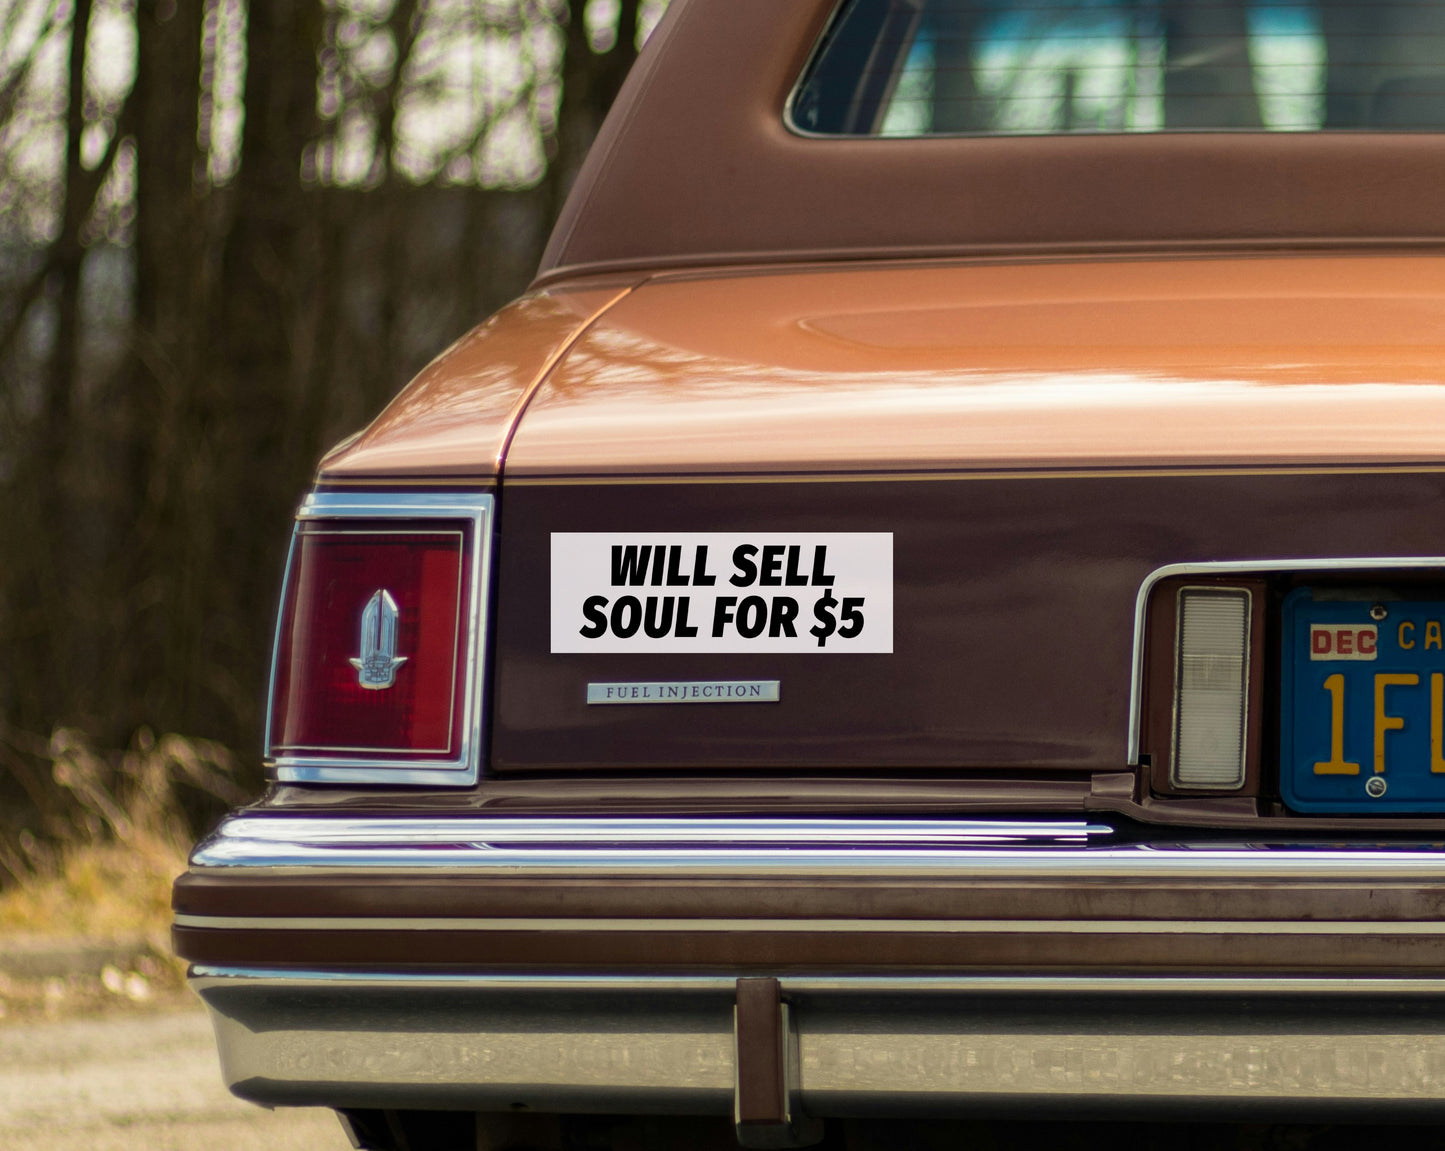 Will Sell Soul For 5 Dollars !  Bumper Sticker